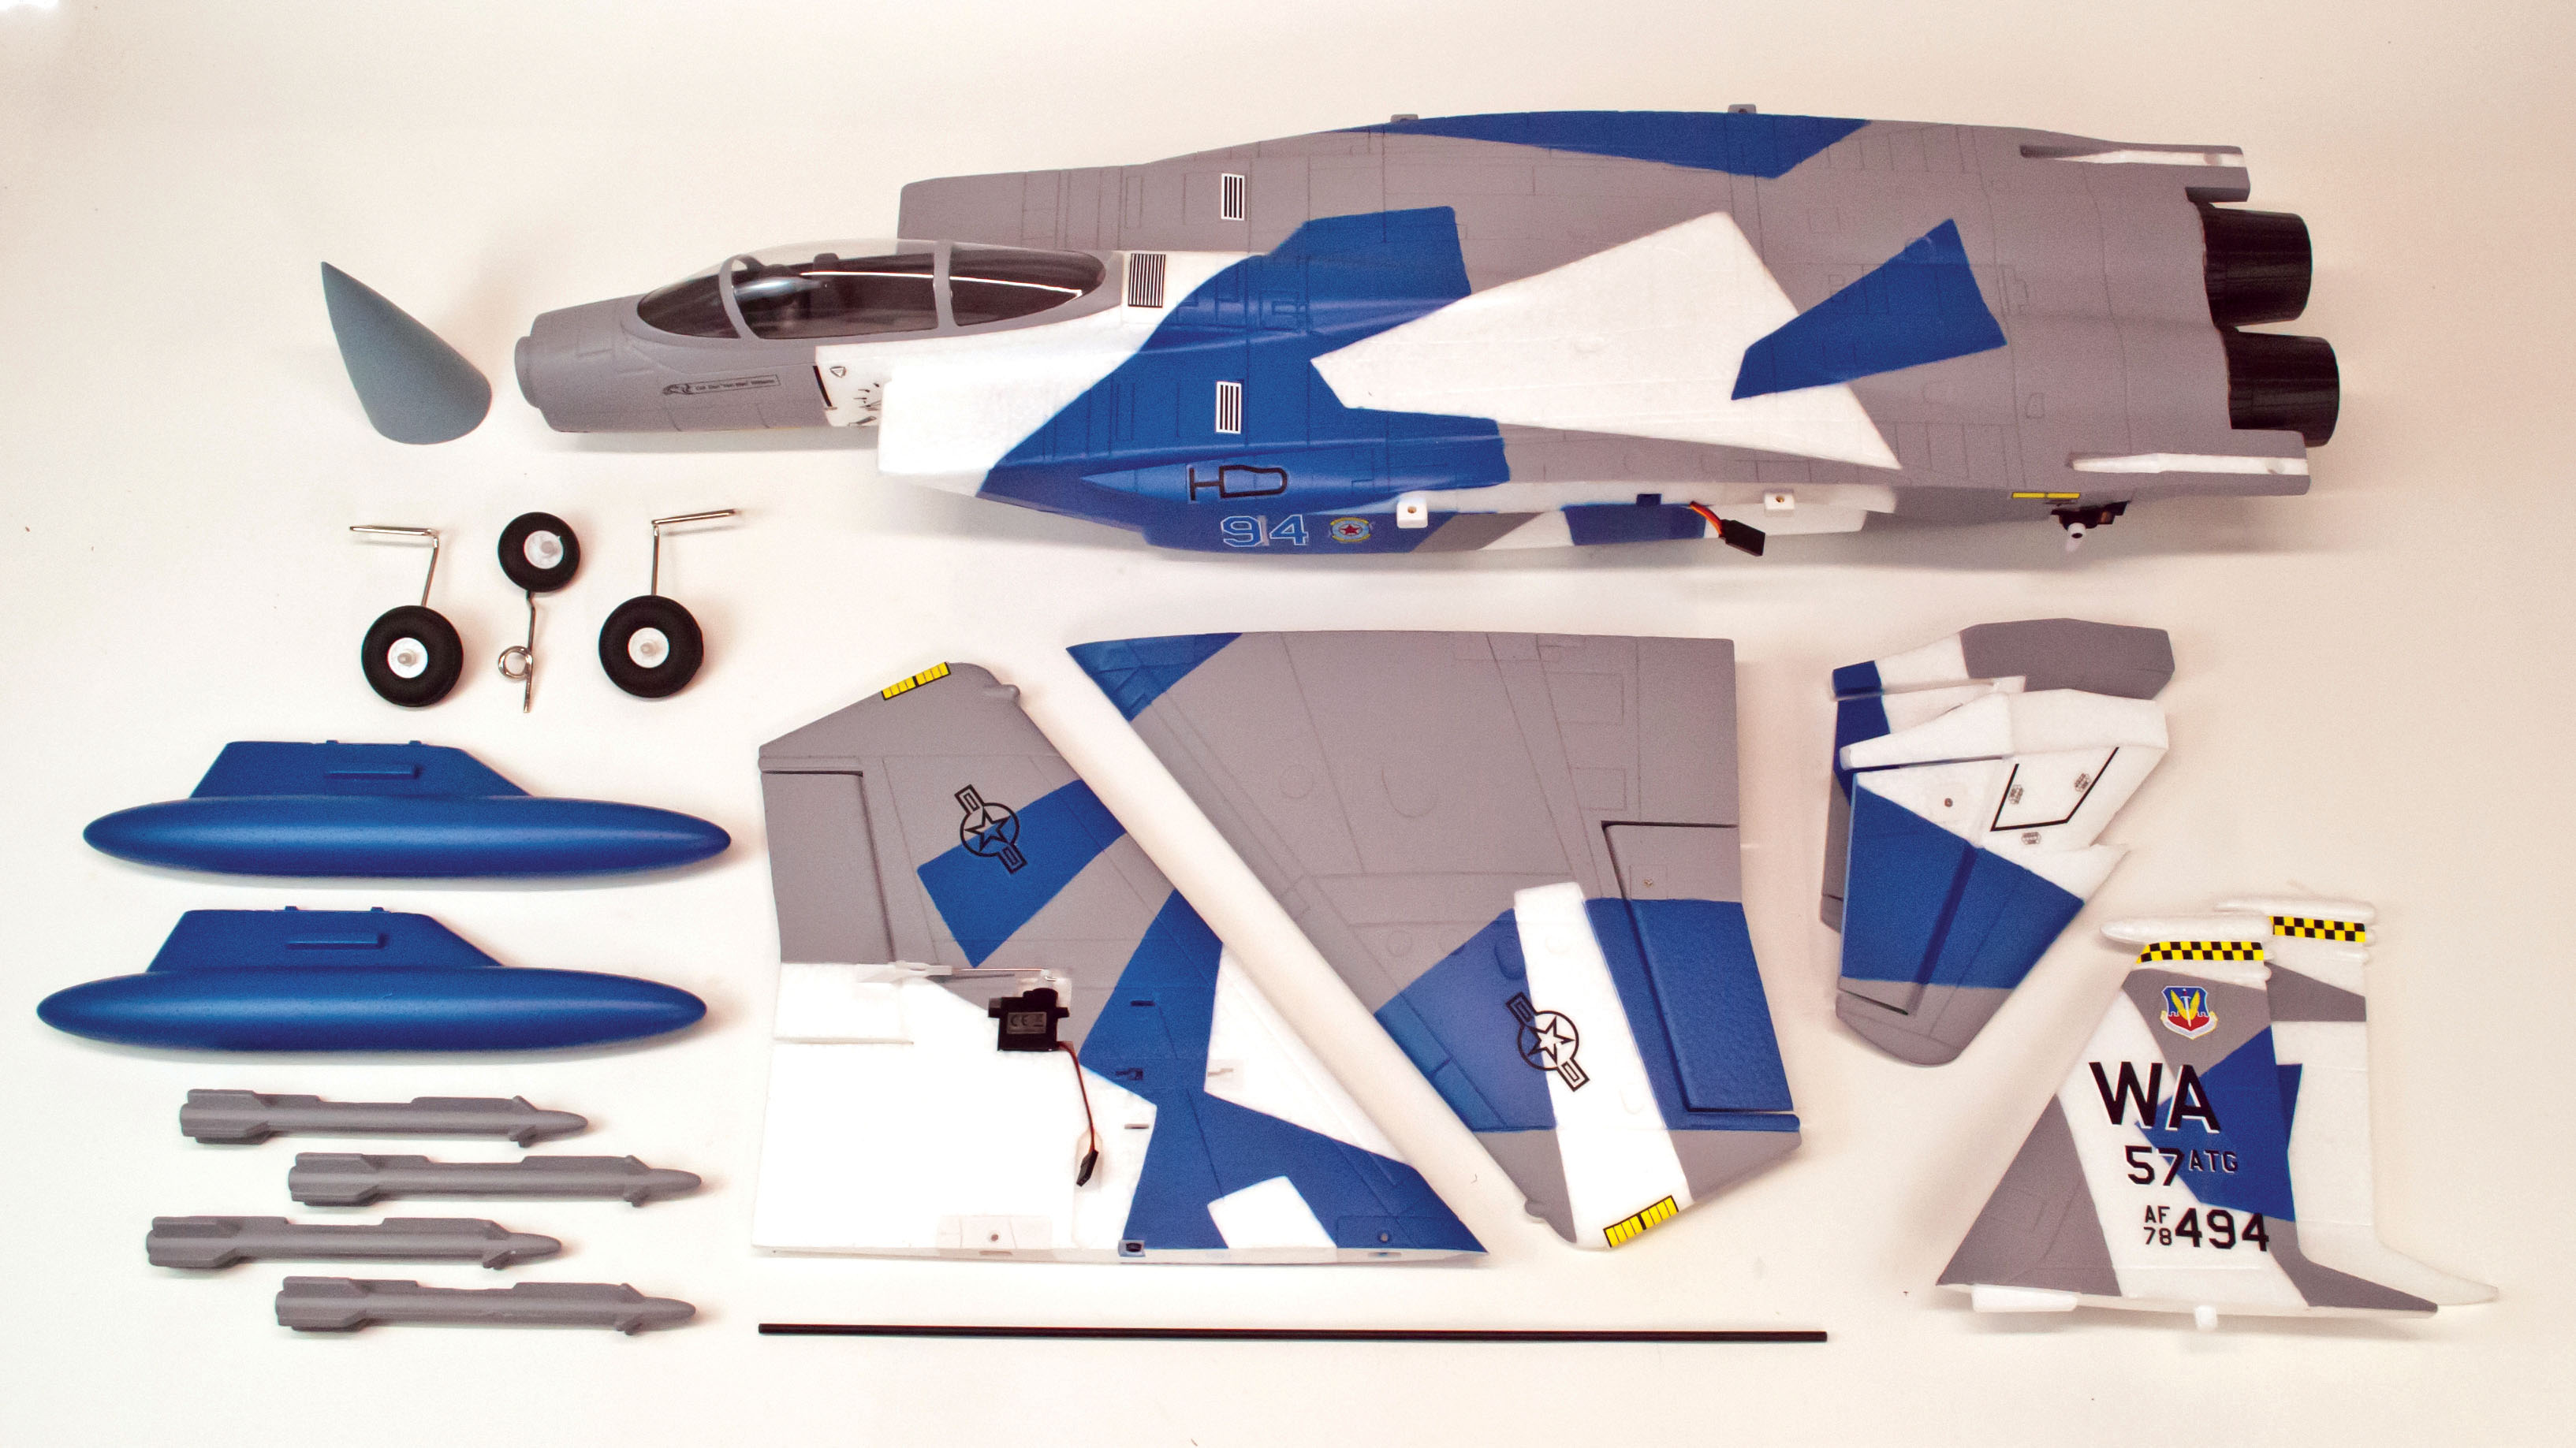 the f-15 is mostly factory